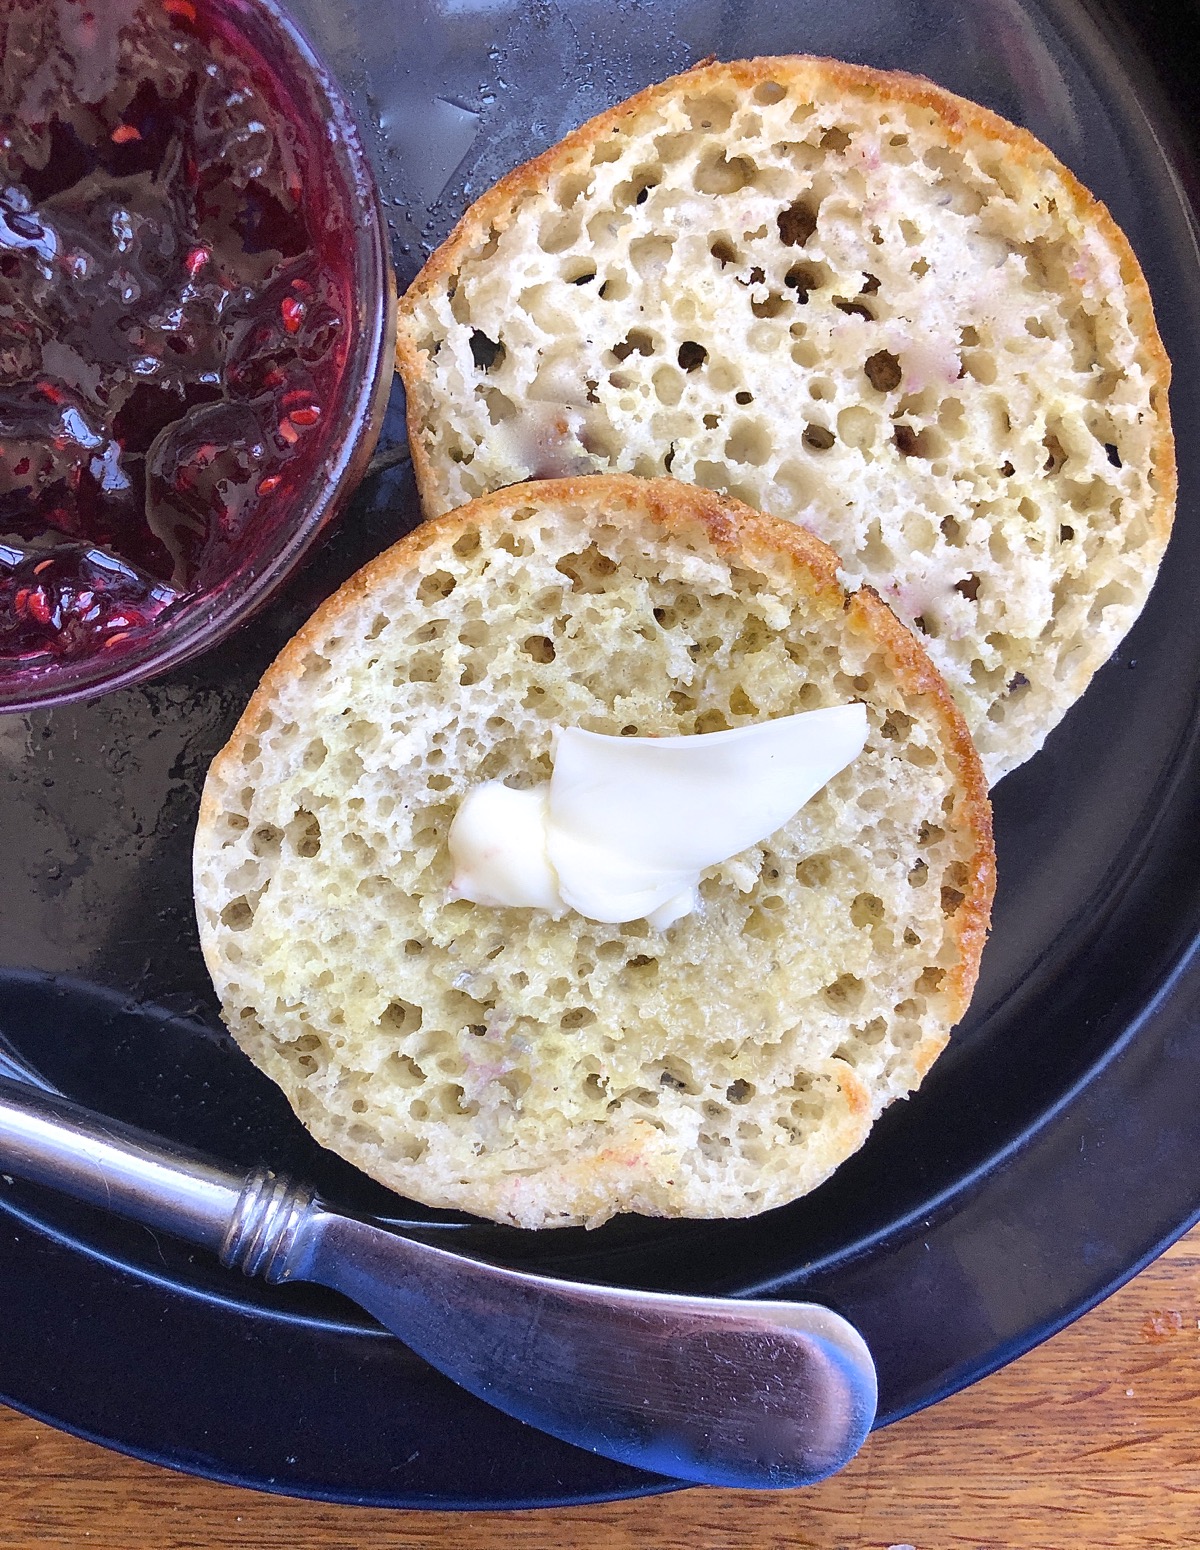 A sourdough crumpet split, warmed, and spread with butter, raspberry jam on the side.